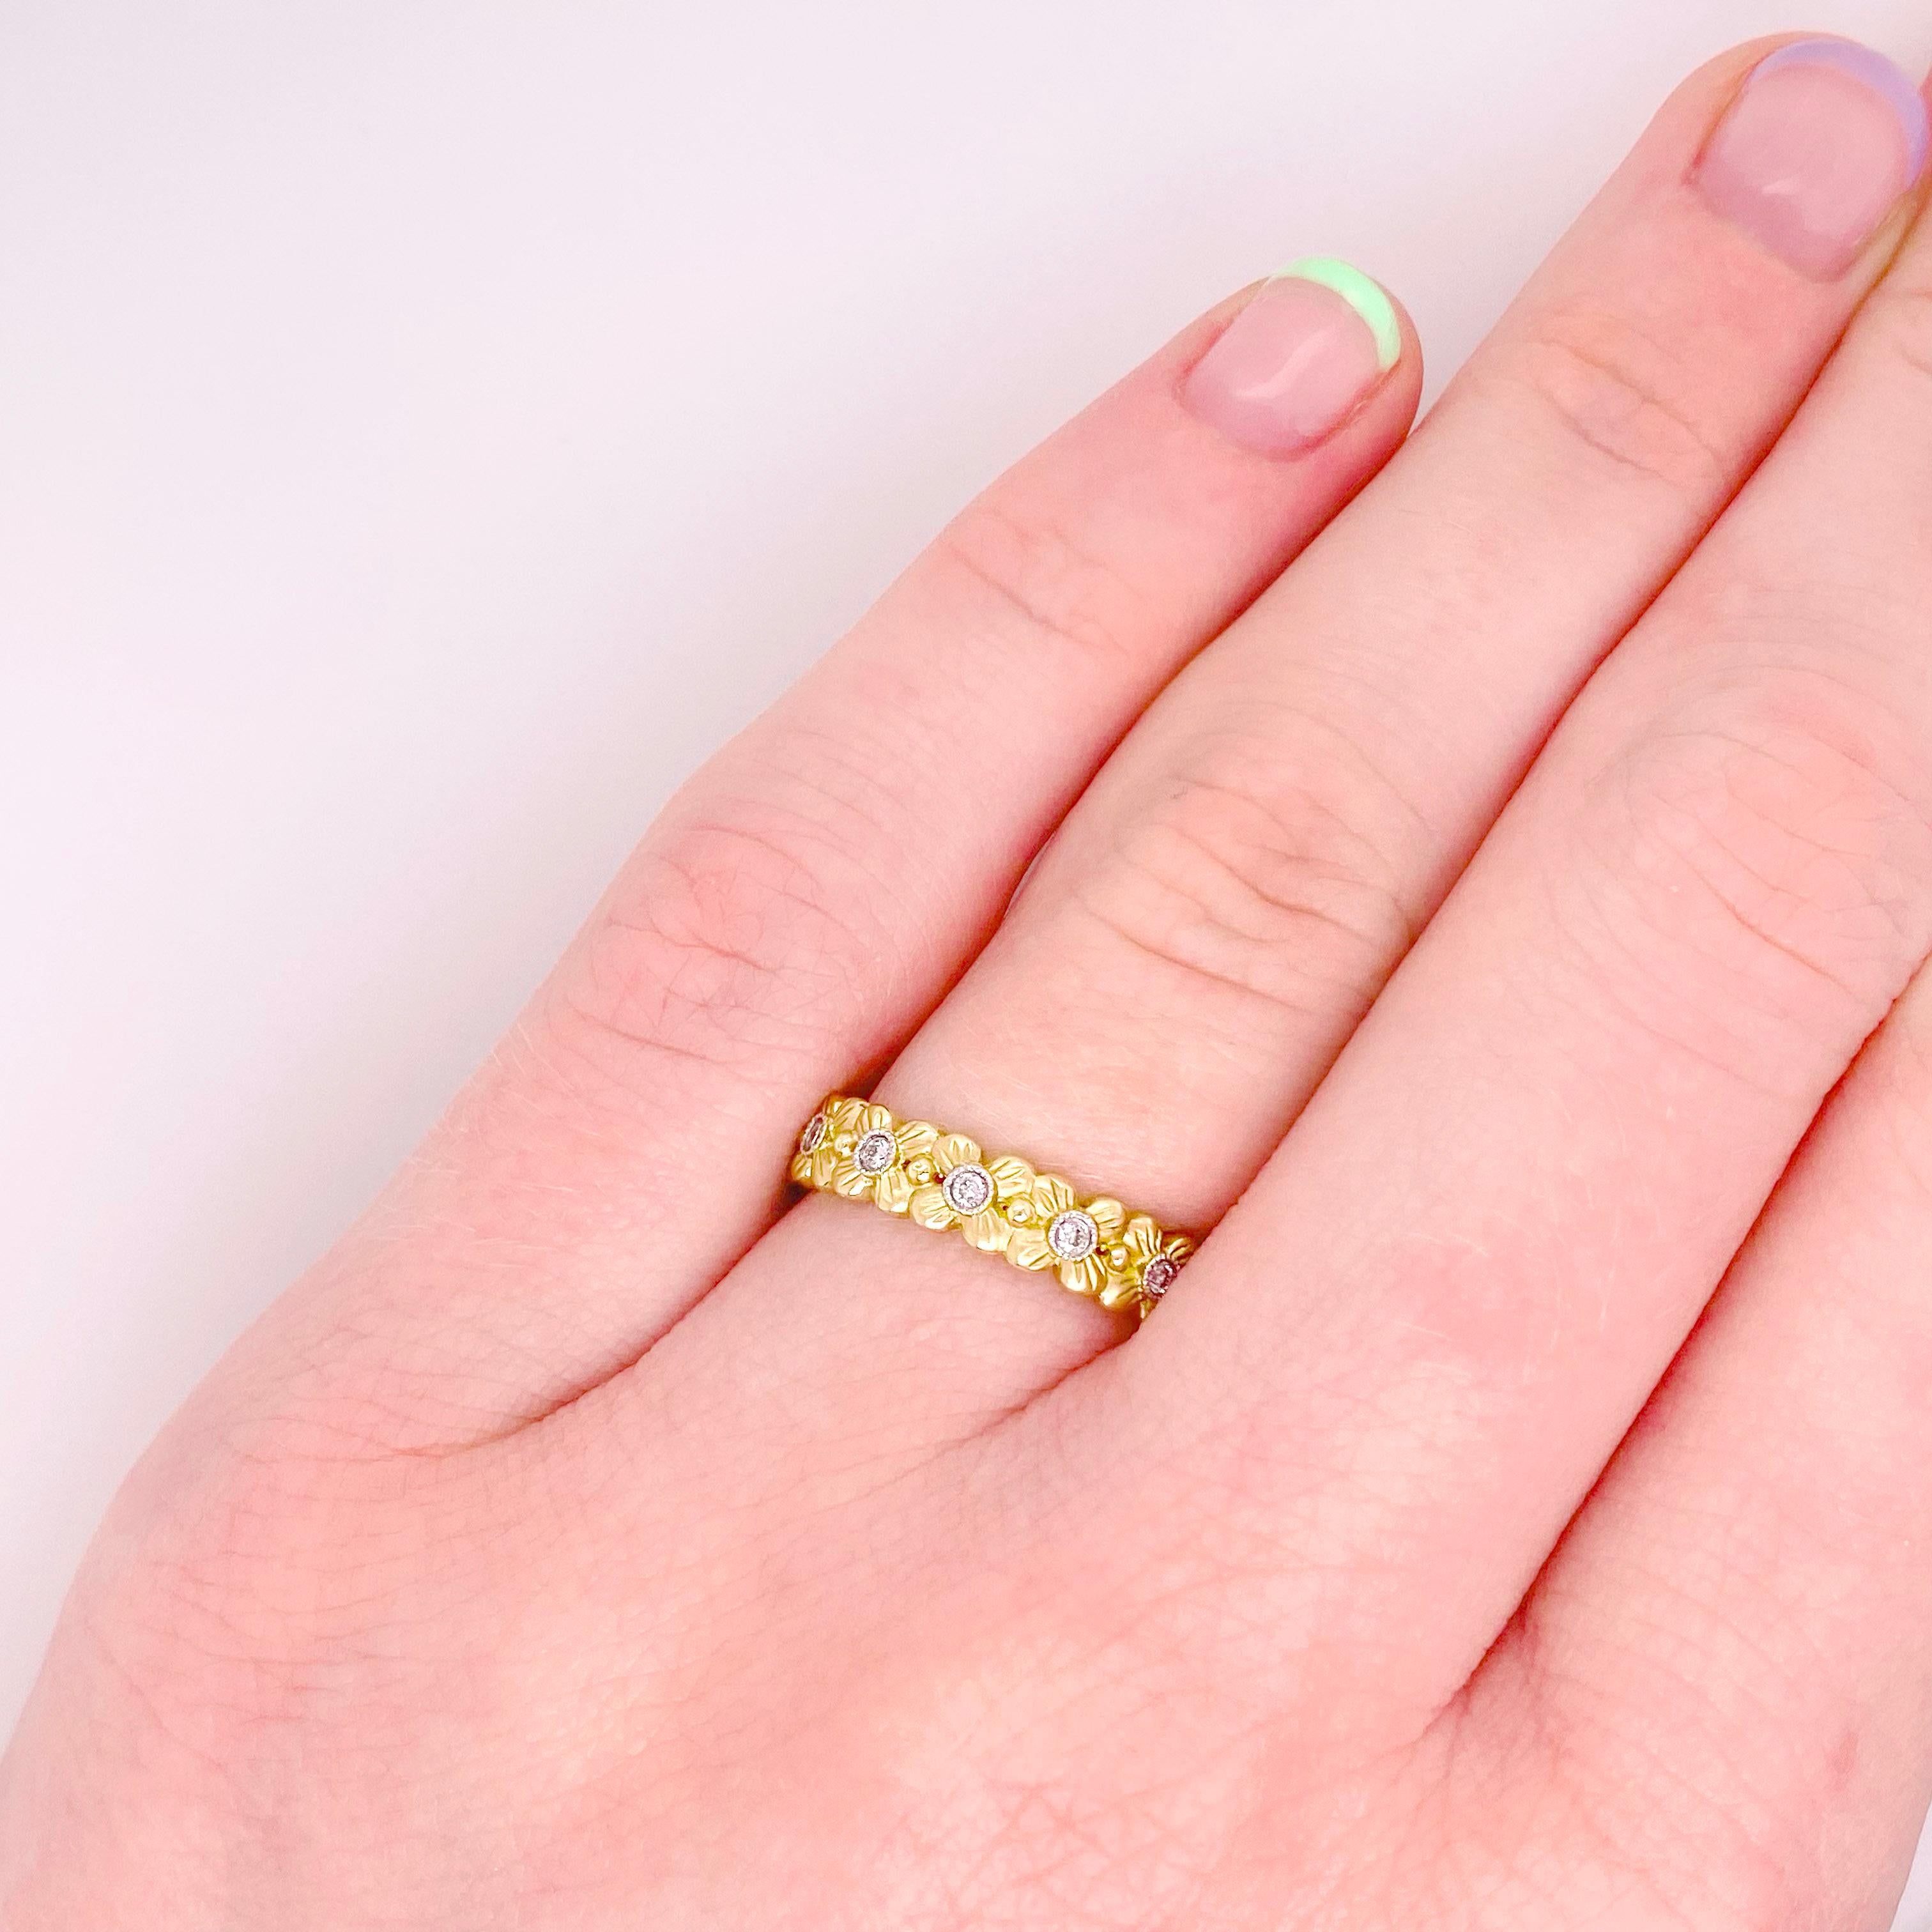 For Sale:  Flowery Design Band by Five Star Jewelry, Flower Eternity Band Sizing Available 4